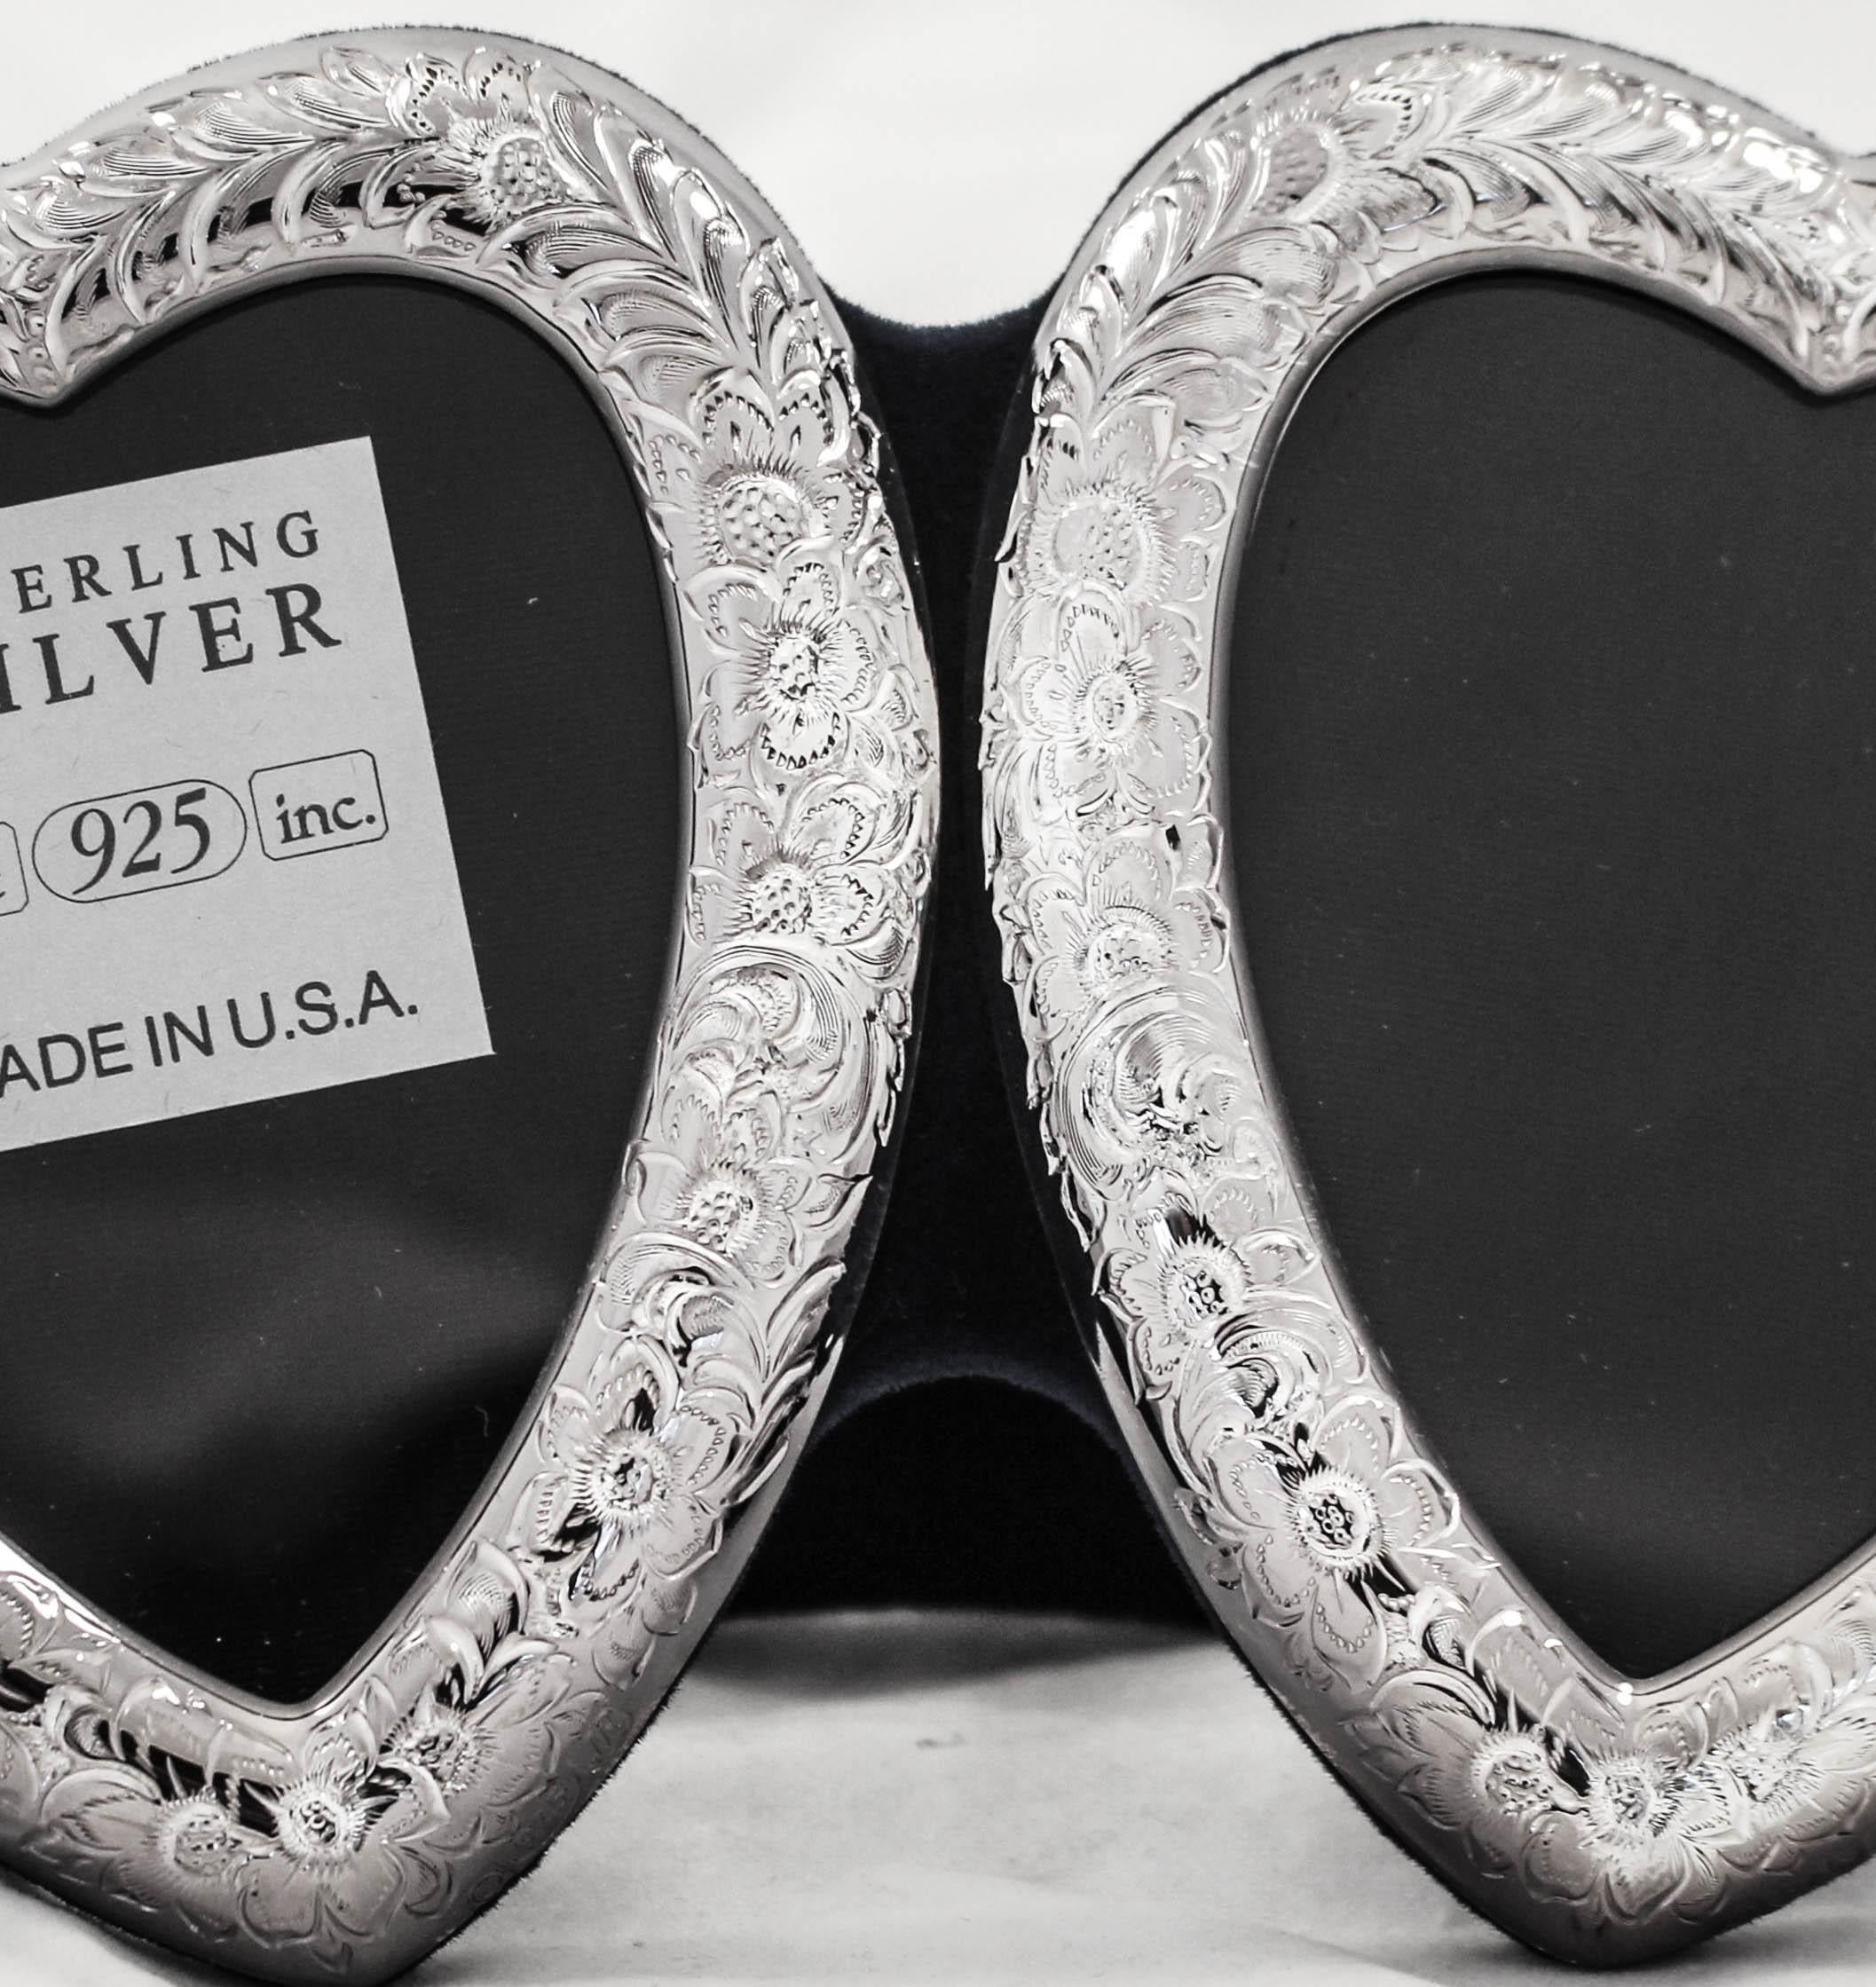 We are offering a new sterling silver double-heart frame. Each heart has an etched flowers and leaves motif. The back is lined in a rich blue velvet. Valentine’s day or any day to look at the ones you love. (A great gift for twins).